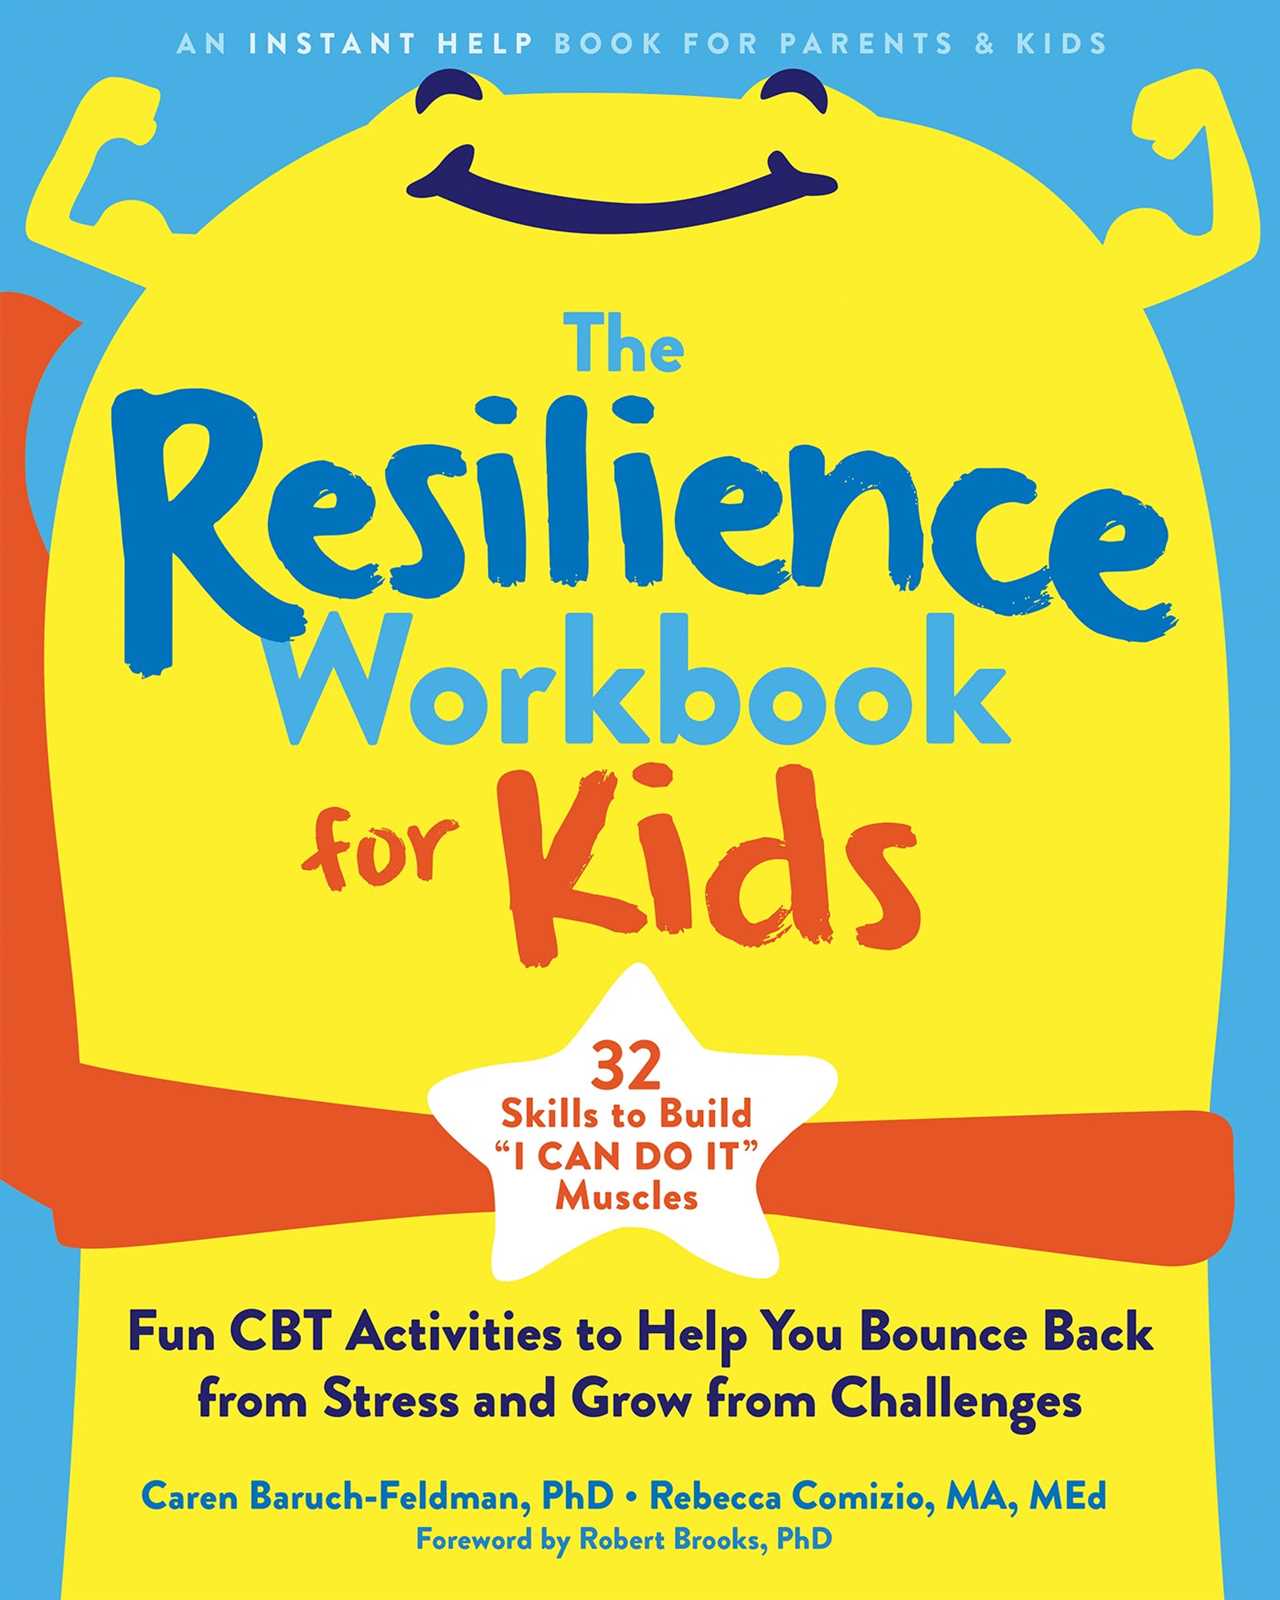 Stress Resiliency Workbook Clinical Studies and Evidence-Based Techniques